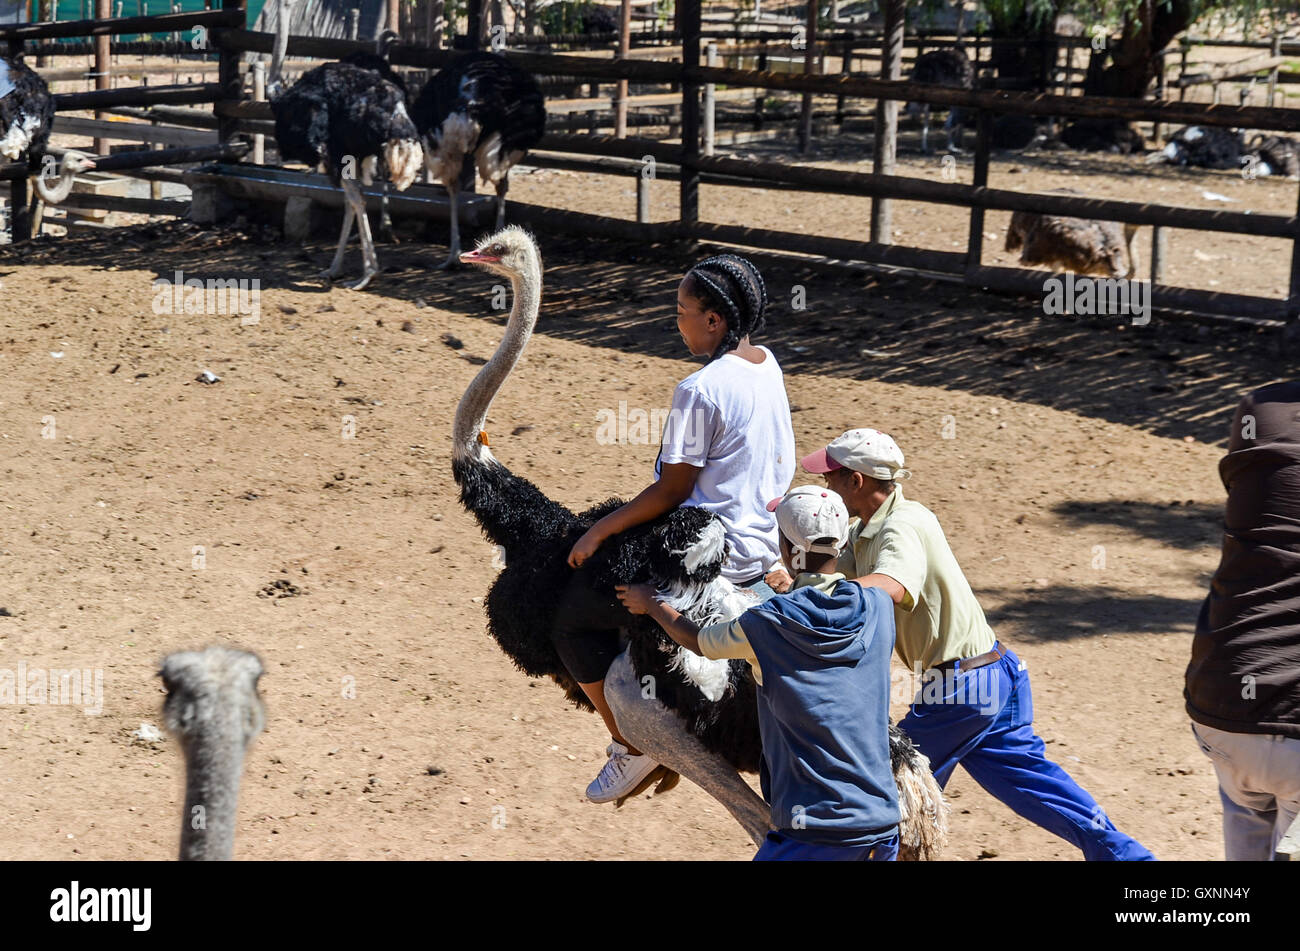 South African girl riding an ostrich in an Ostrich farm near Oudtshoorn, South Africa Stock Photo